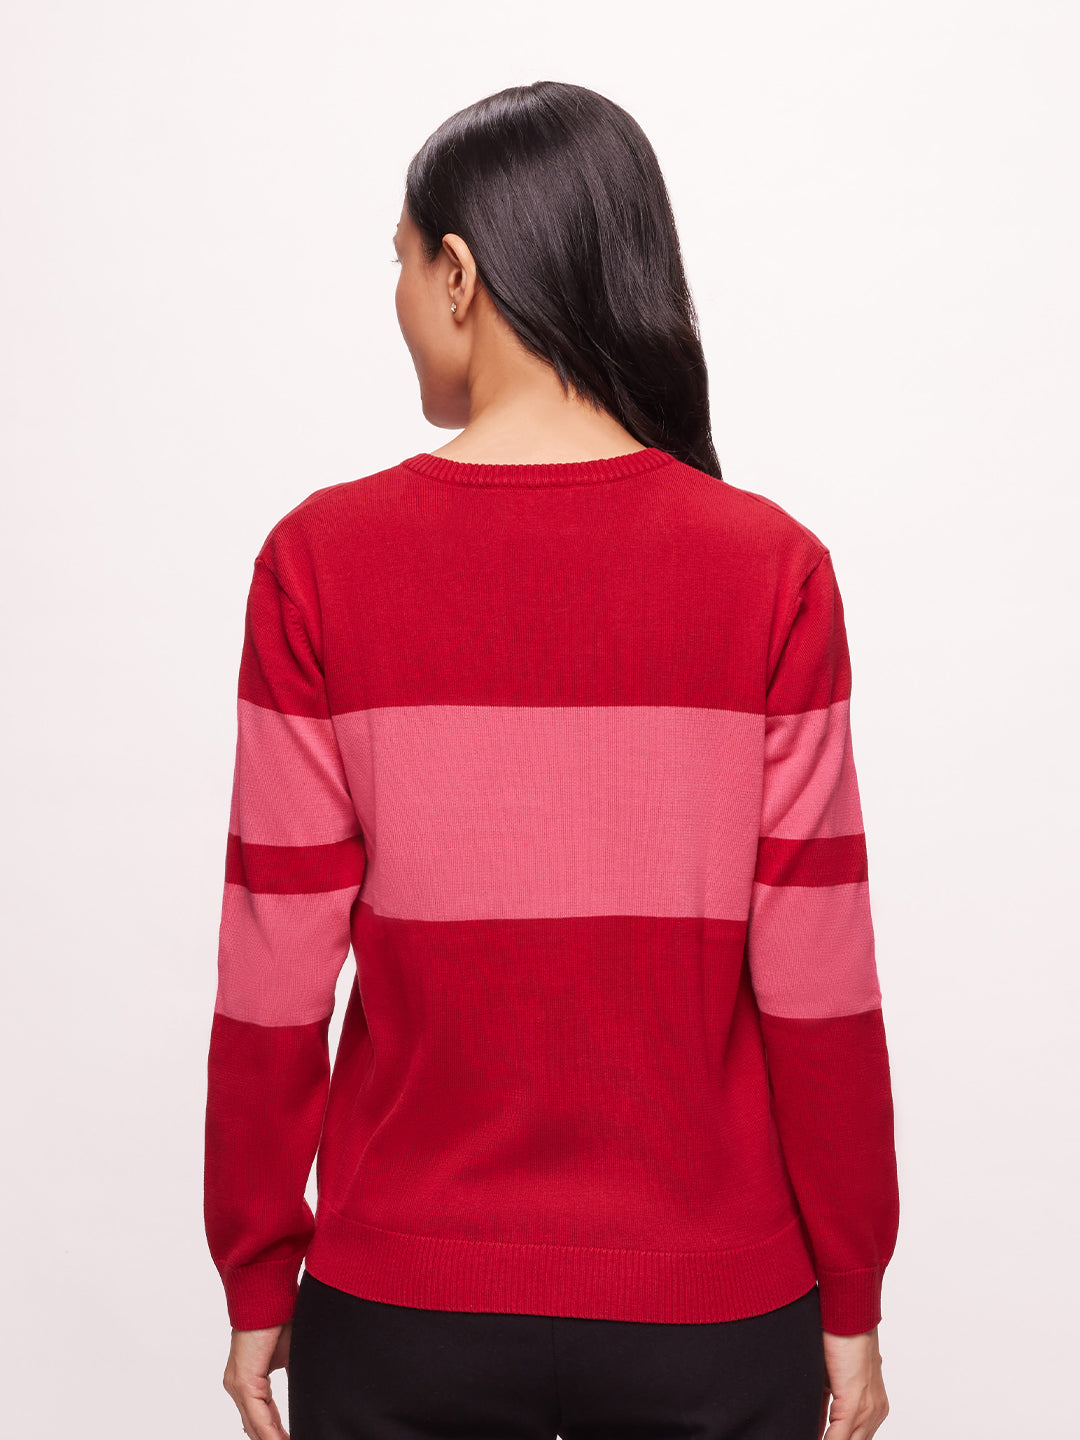 Bombay High Women's Premium Cotton Red & Pink Color Block Patterned V Neck Pullover